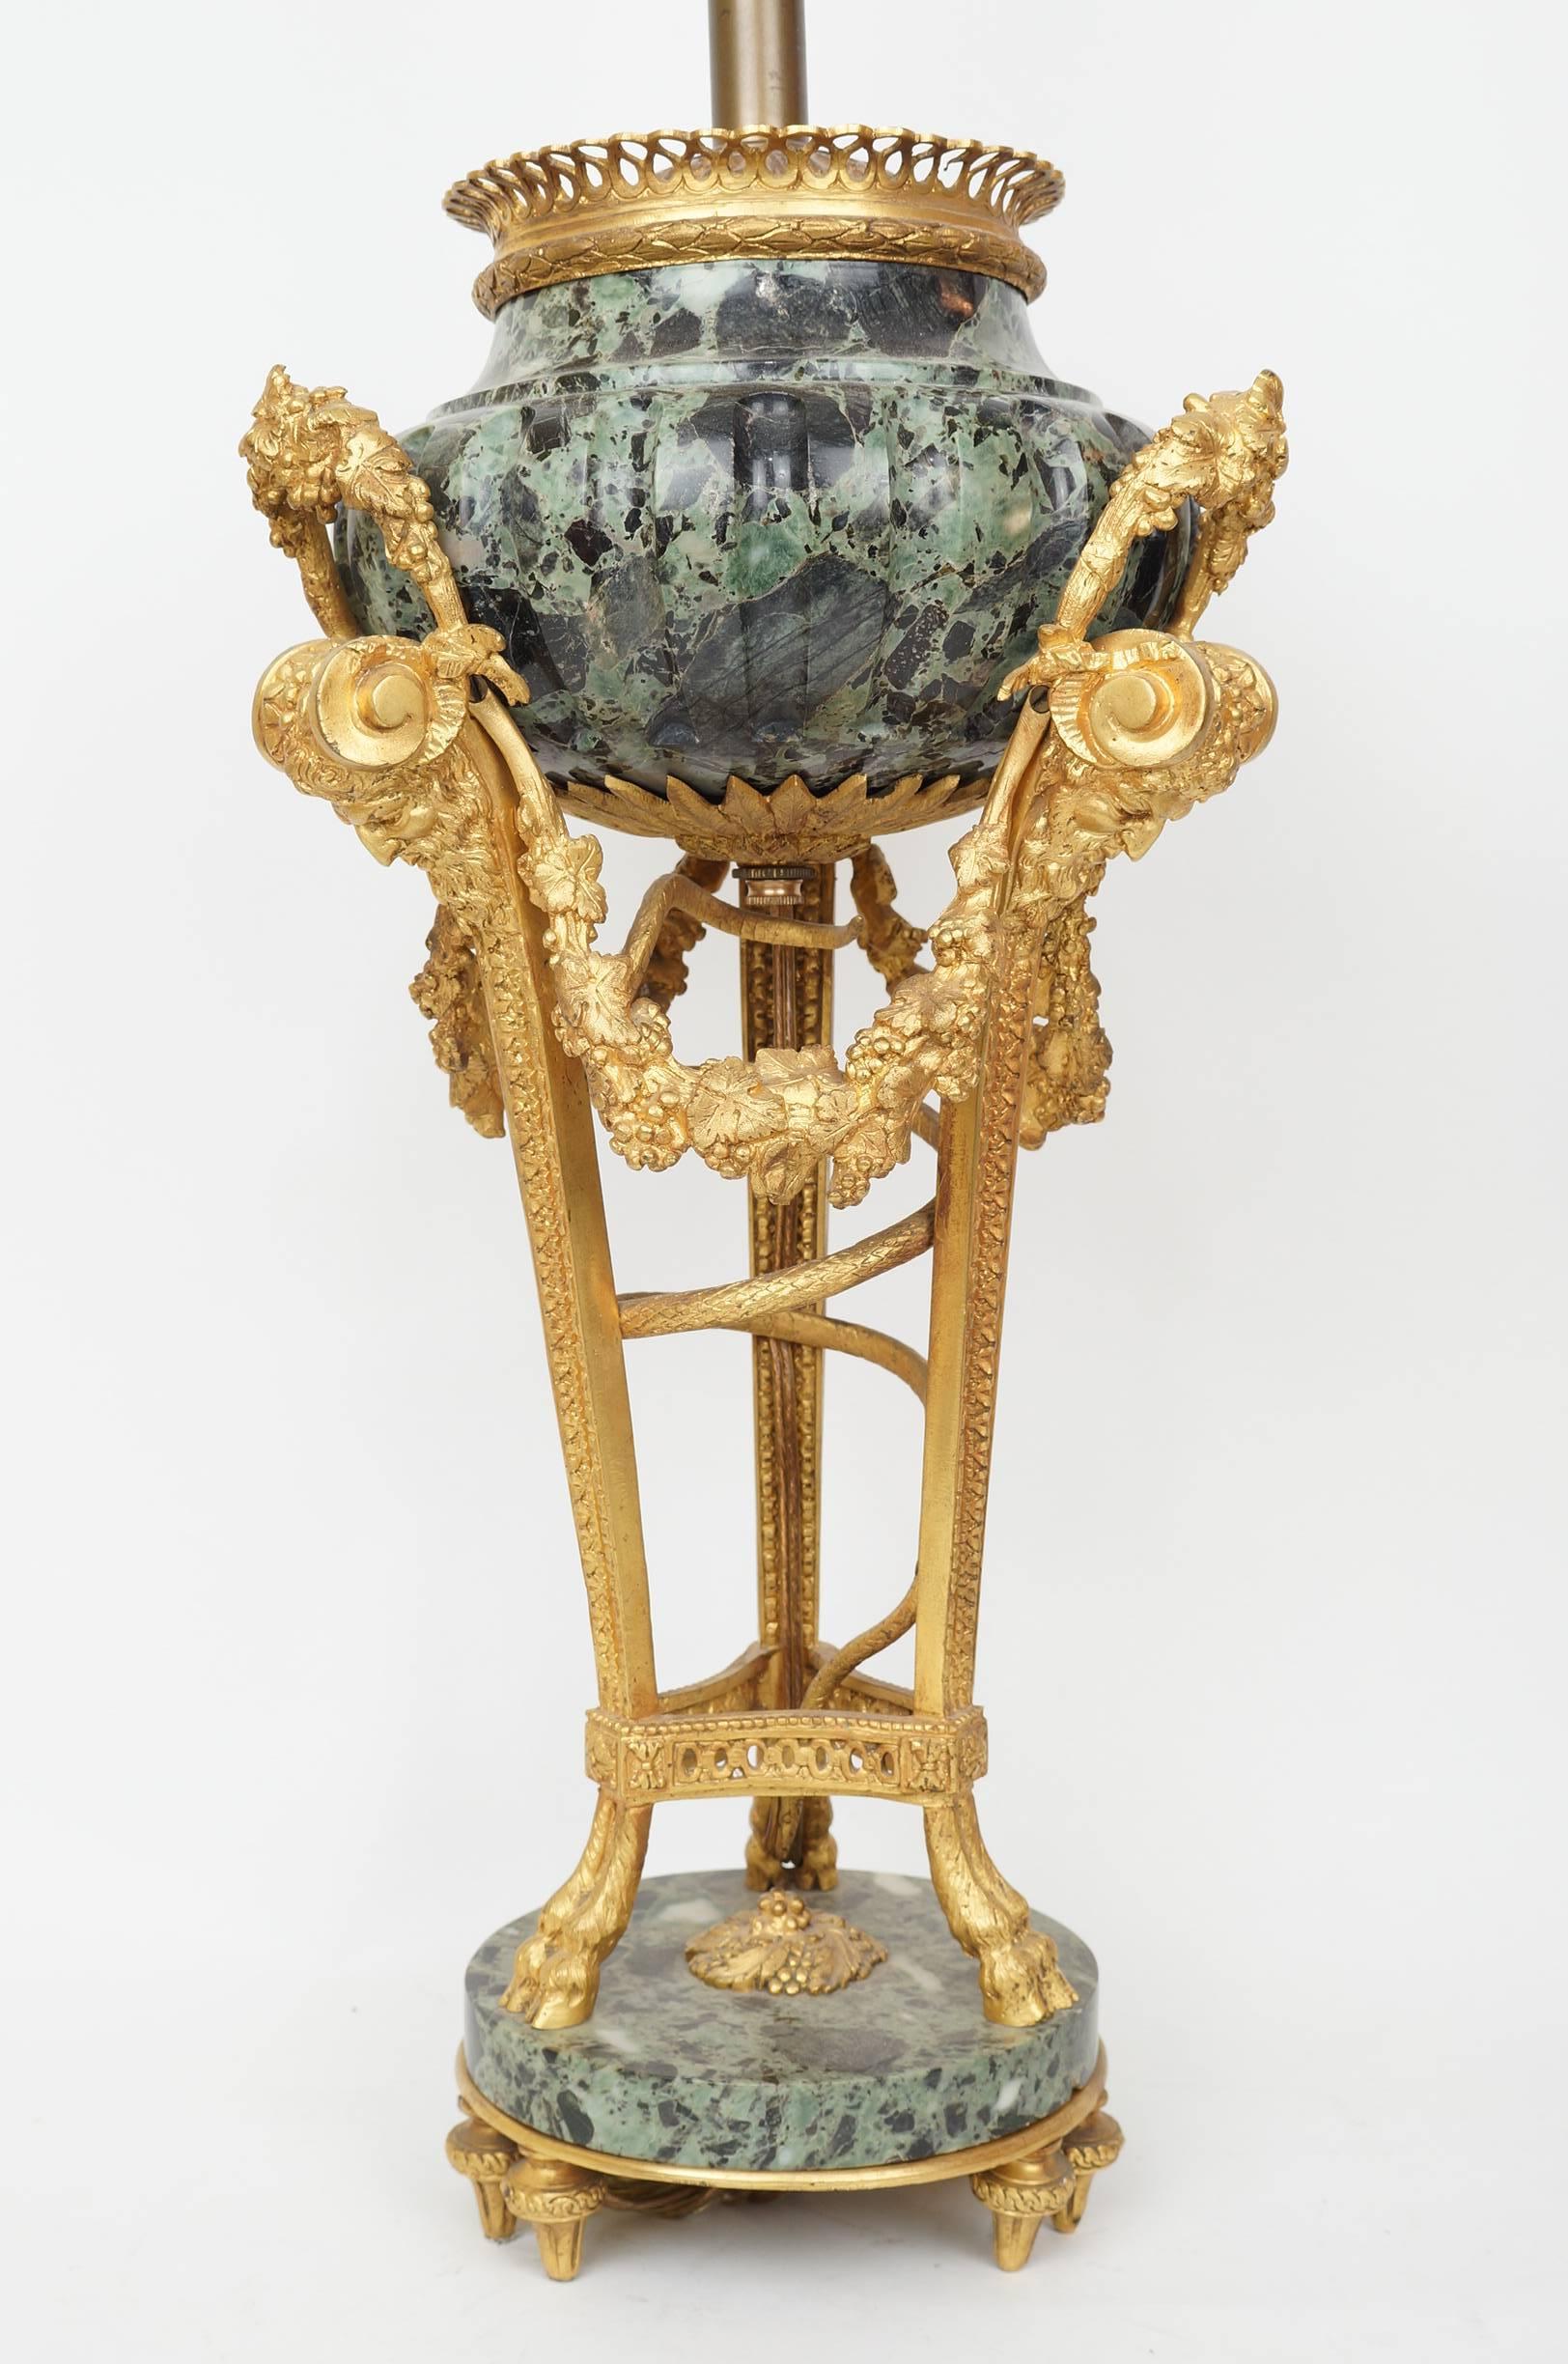 Pair of French Louis XVI style gilt bronze and marble figural table lamps with mask face motif in neoclassical style.